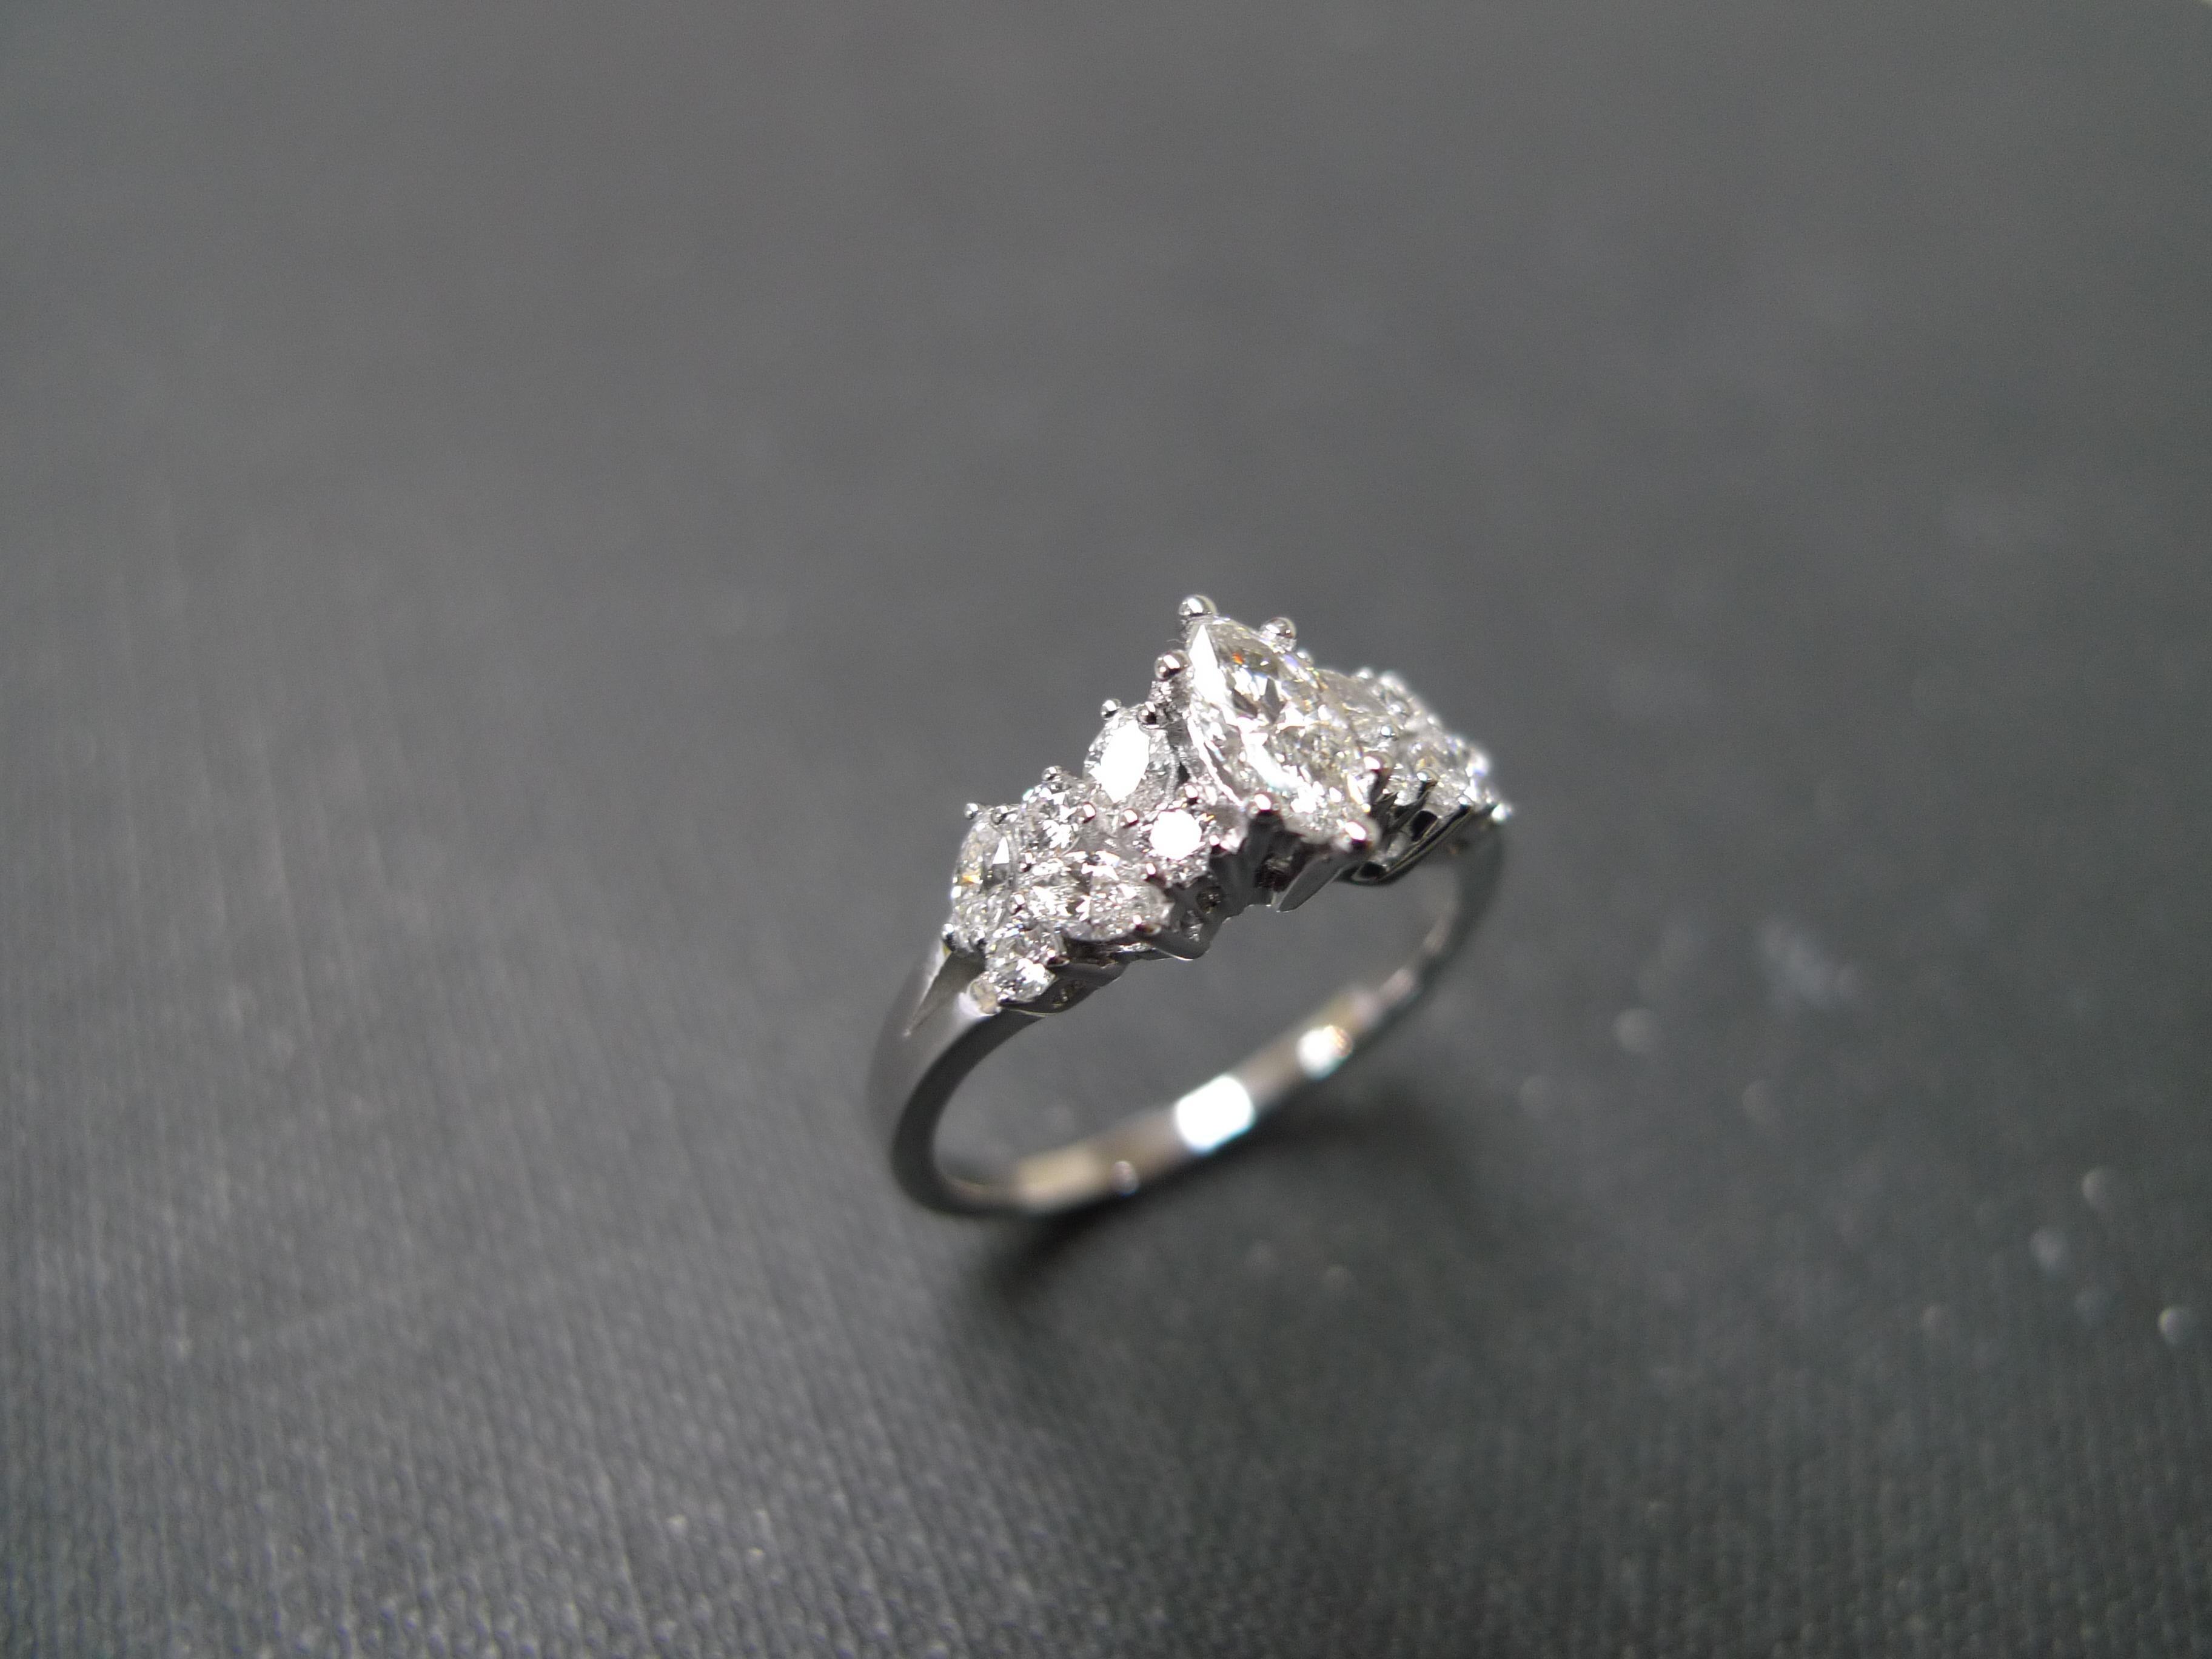 For Sale:  Marquise Cut Diamond Unique Engagement Ring in 18K White Gold with GIA Certified 2